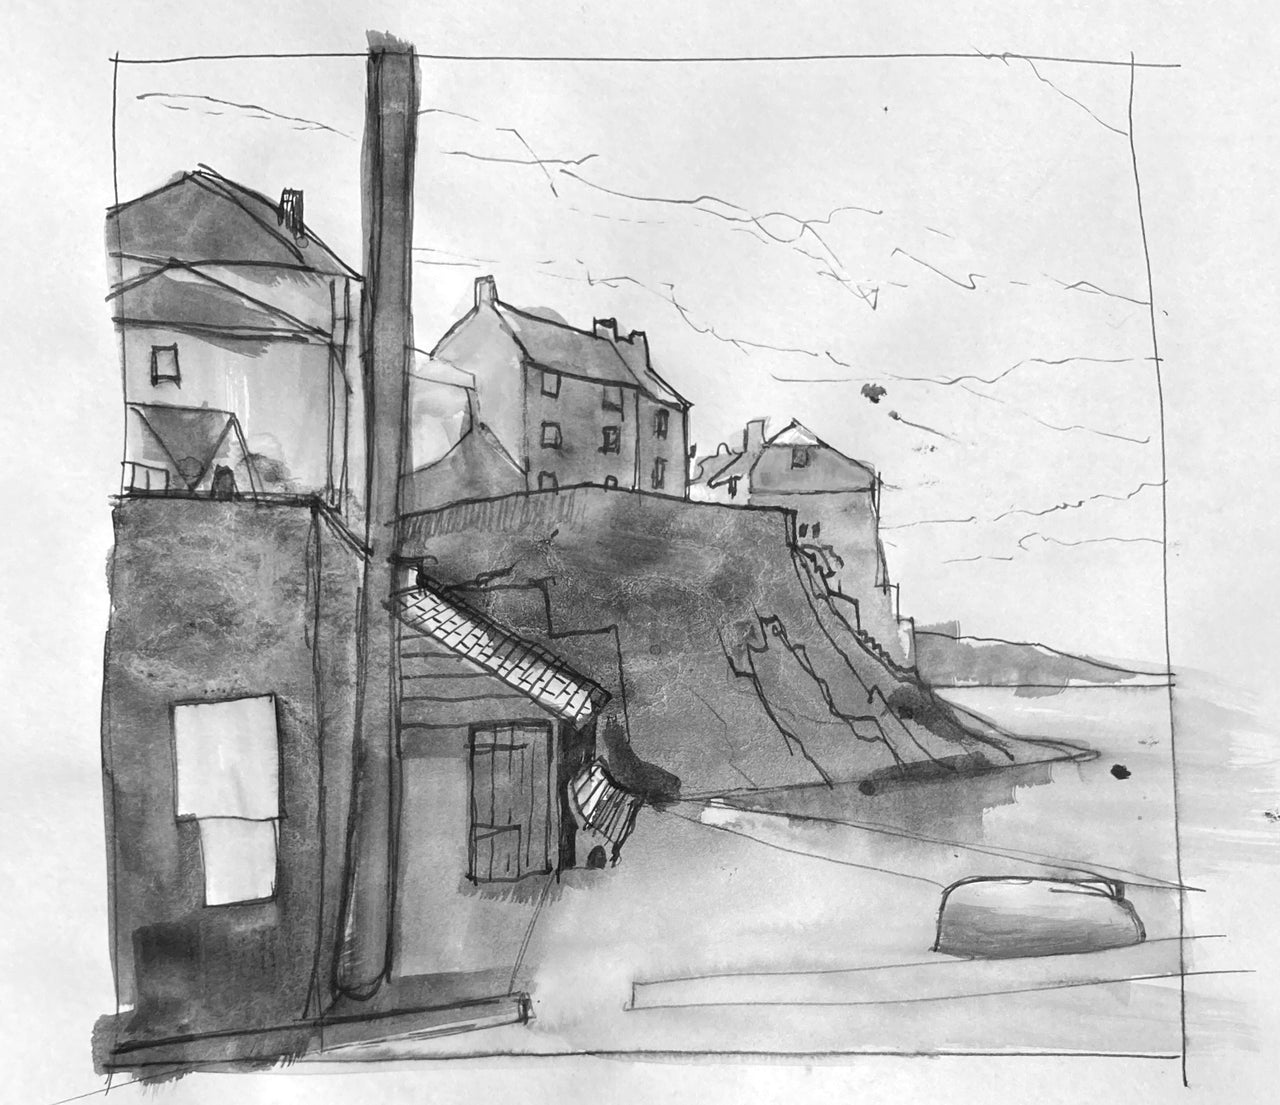 Black & white drawing of houses overlooking ocean with beach and upturned boat in the foreground by artist Steven Buckler